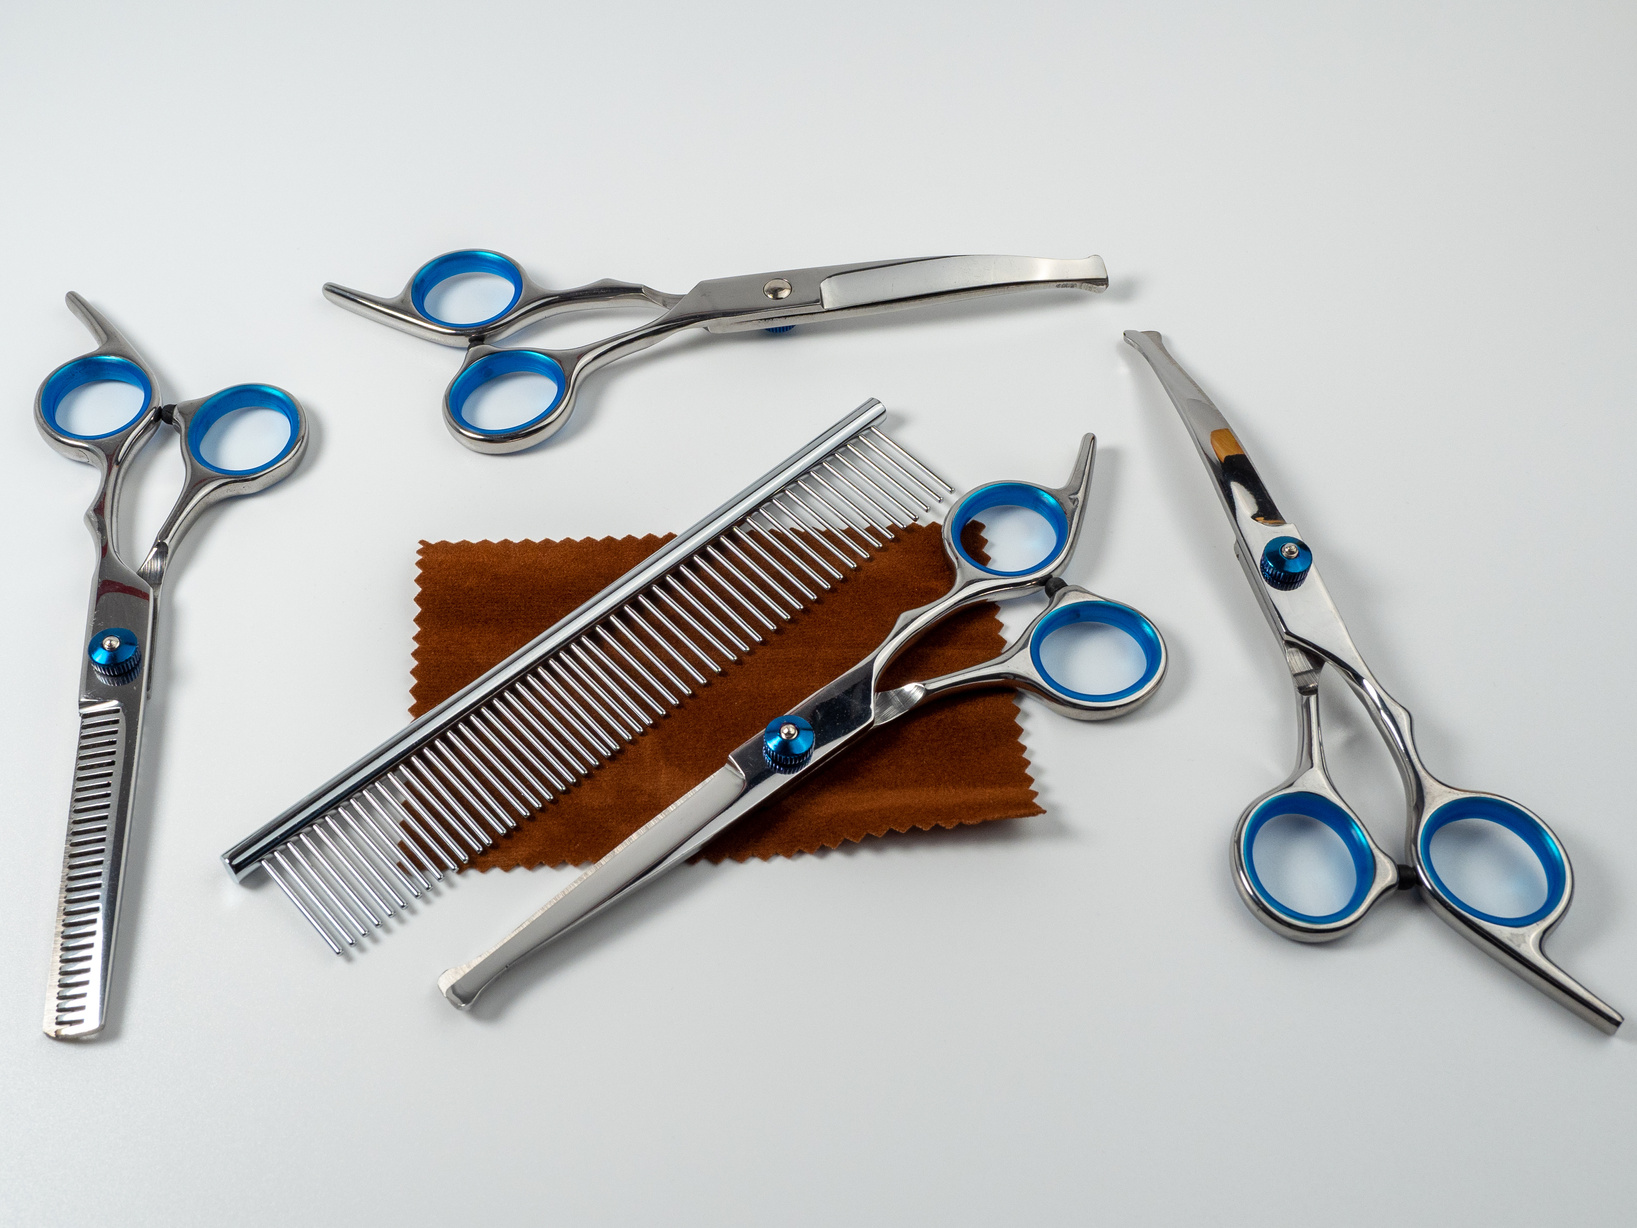 Scissors and comb for grooming dogs. Dog grooming kit.